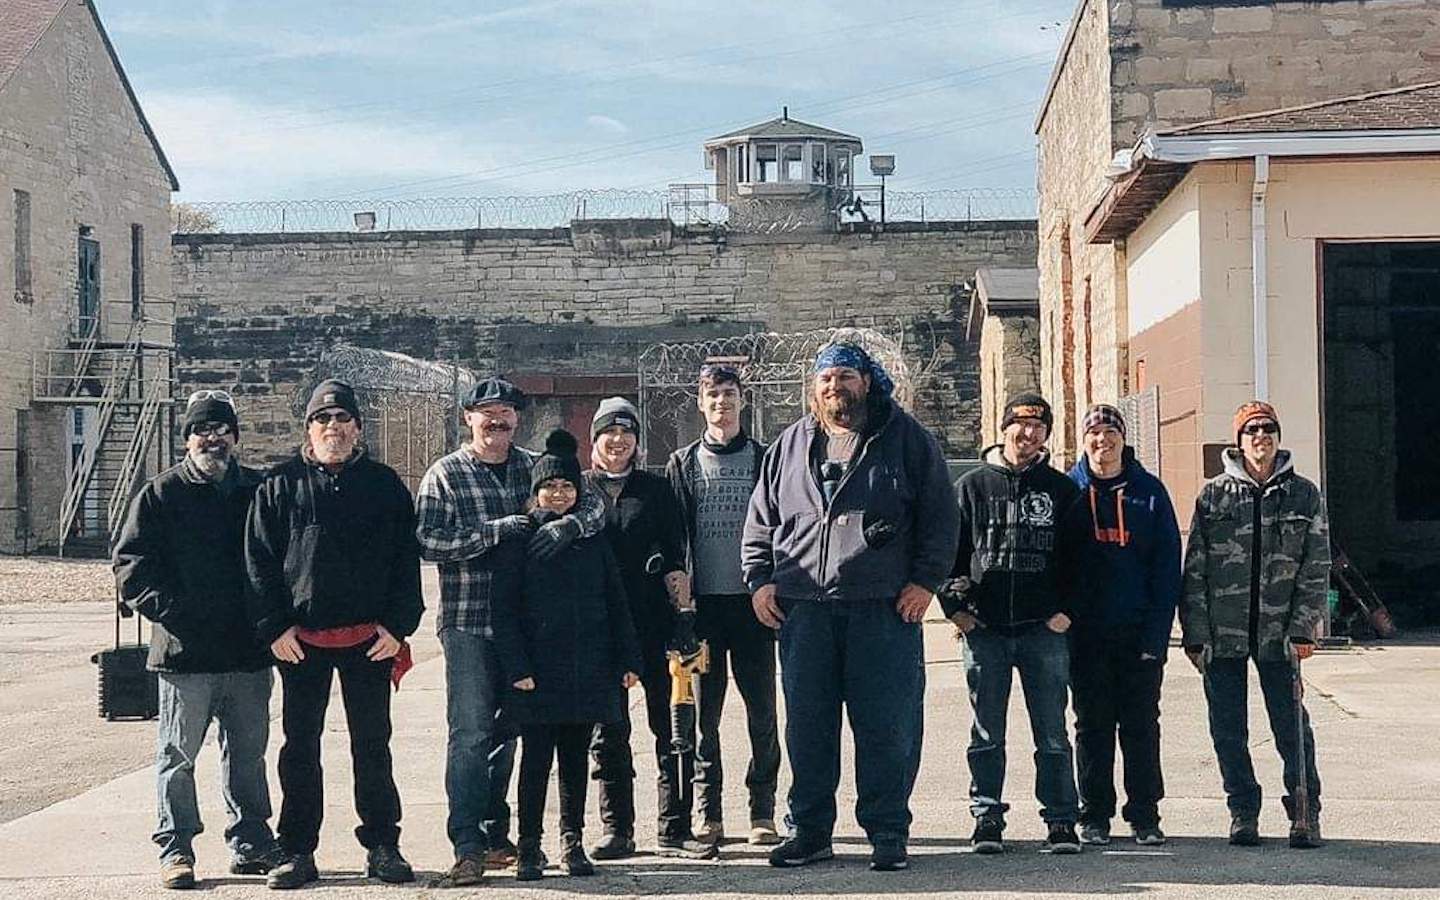 Roosevelt University alum Michael Kucynda, far left, with the other members of the Saturday Squad at Old Joliet Prison.